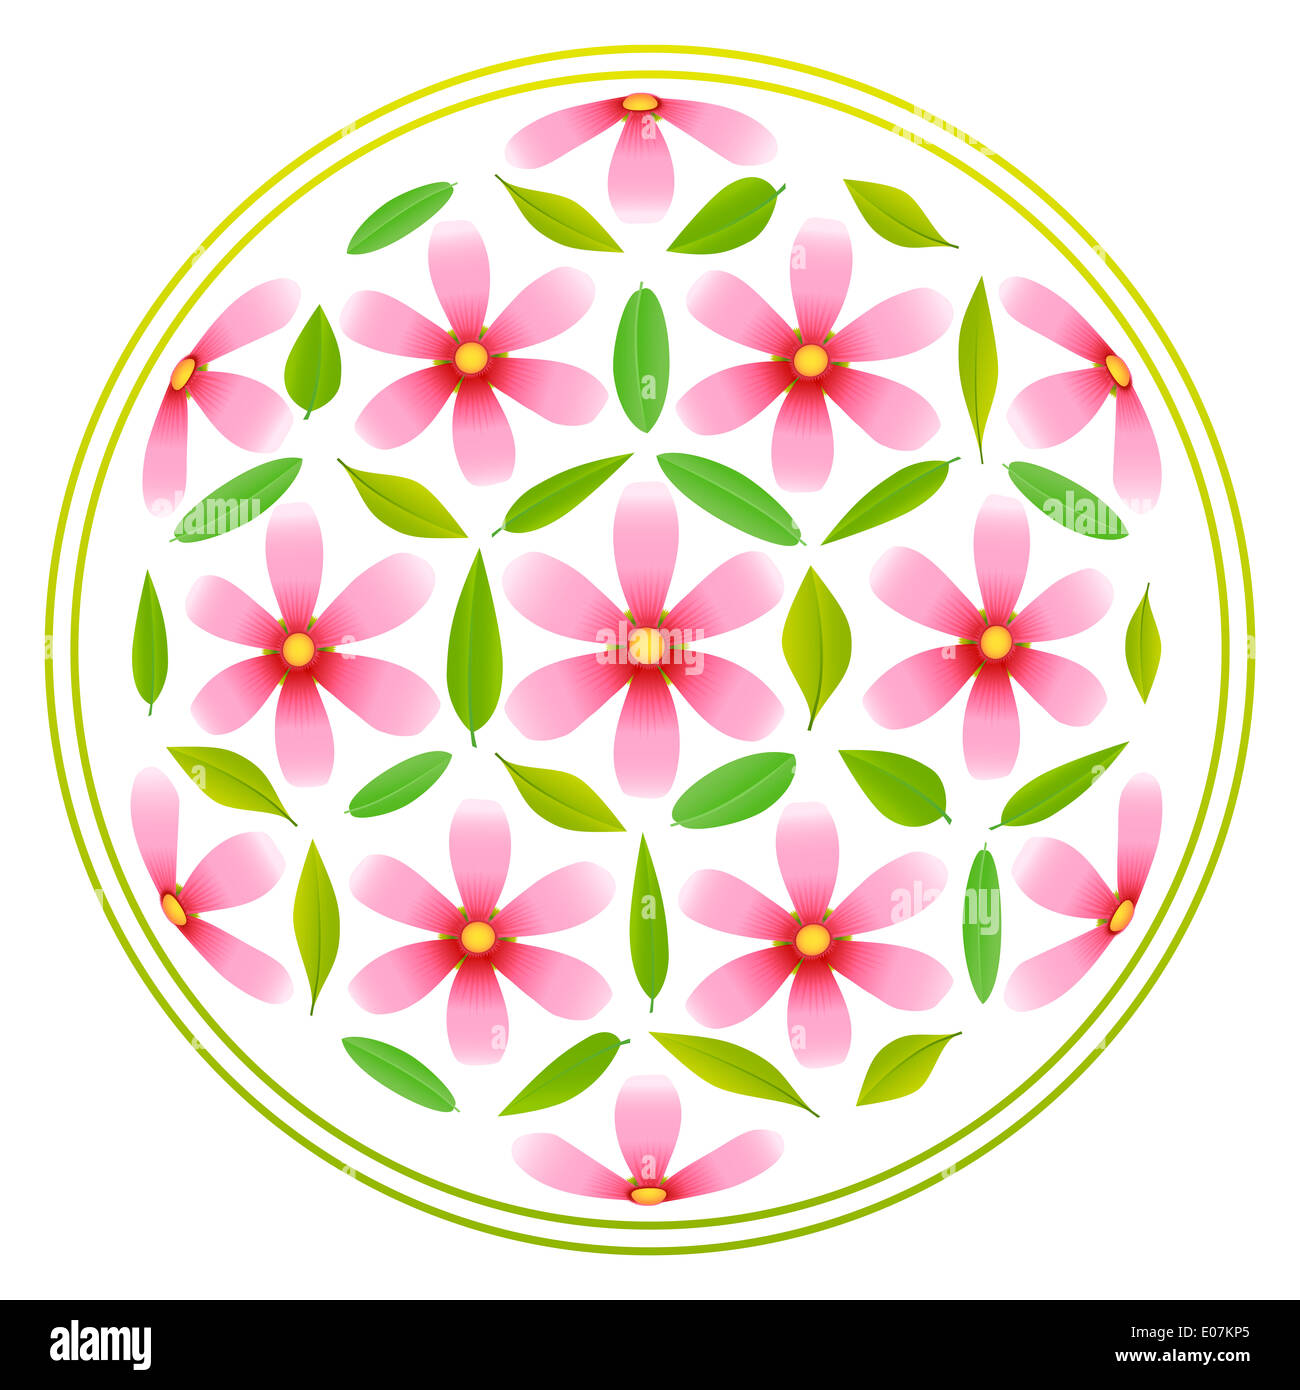 Flower-of-life-Symbol composed of pink flowers and green leaves. Stock Photo